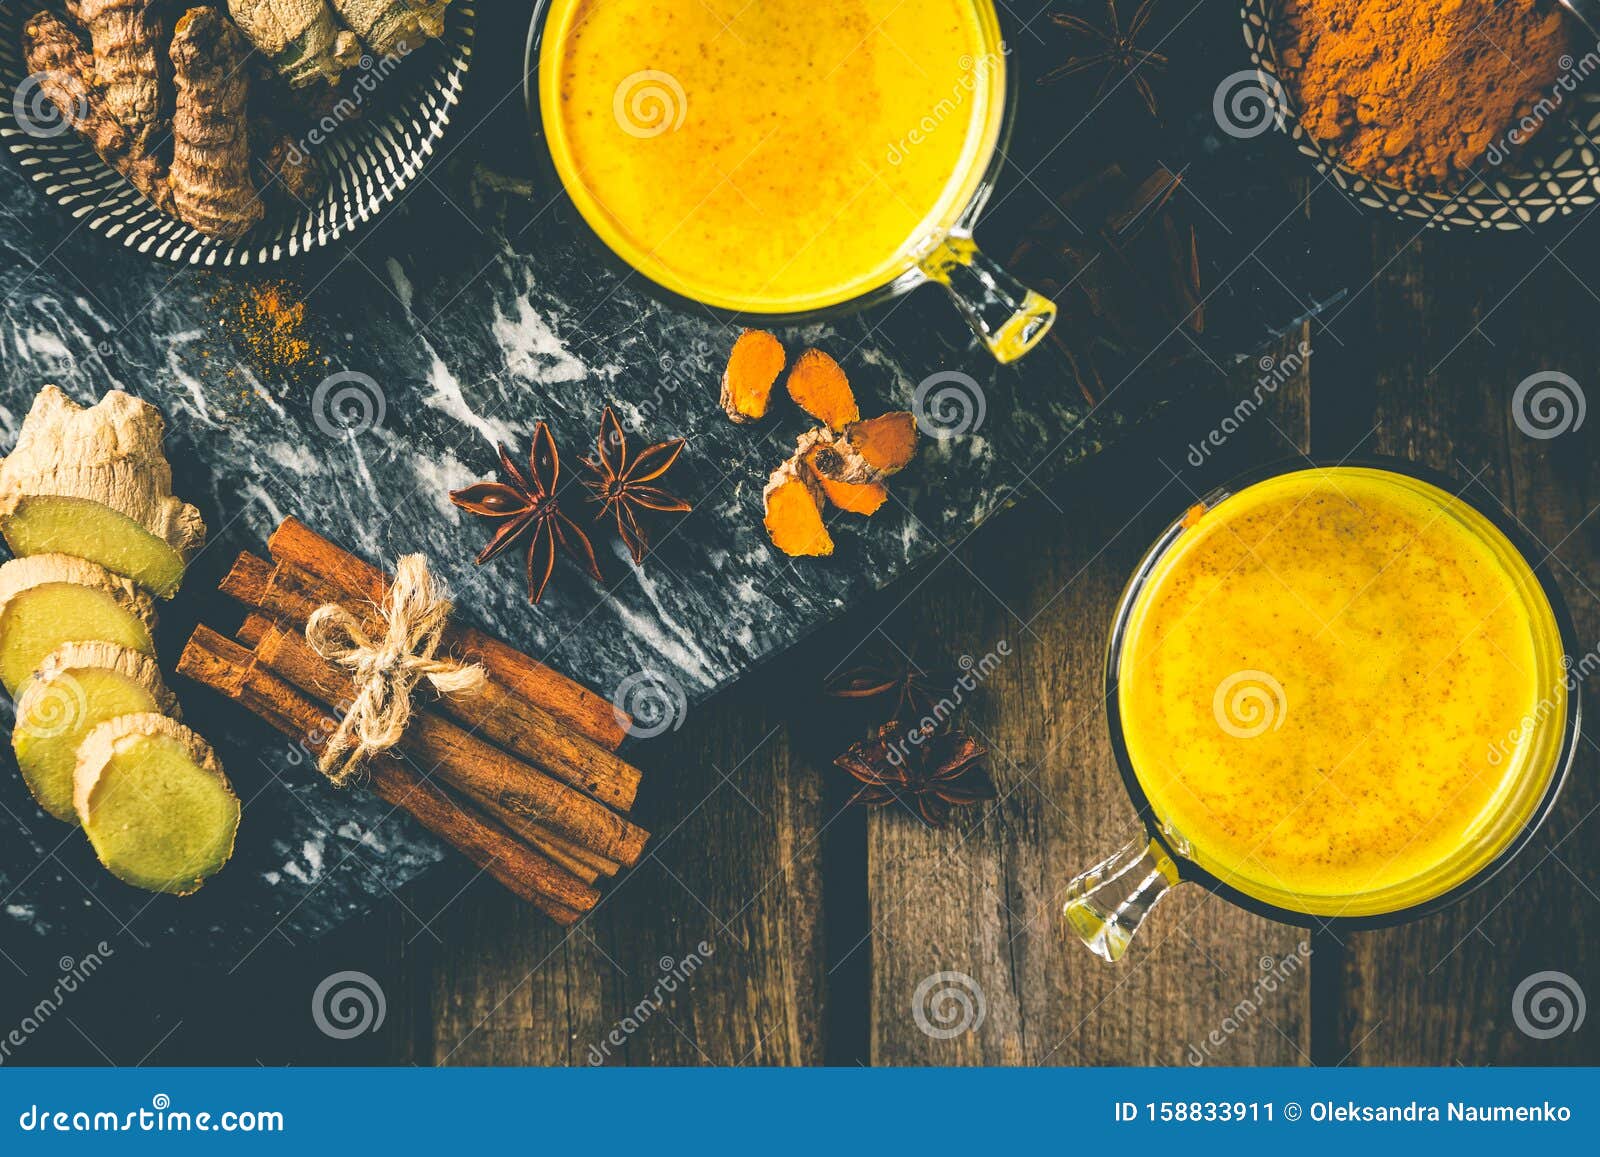 Turmeric Golden Milk and Ingredients on Wood Background Stock Image ...